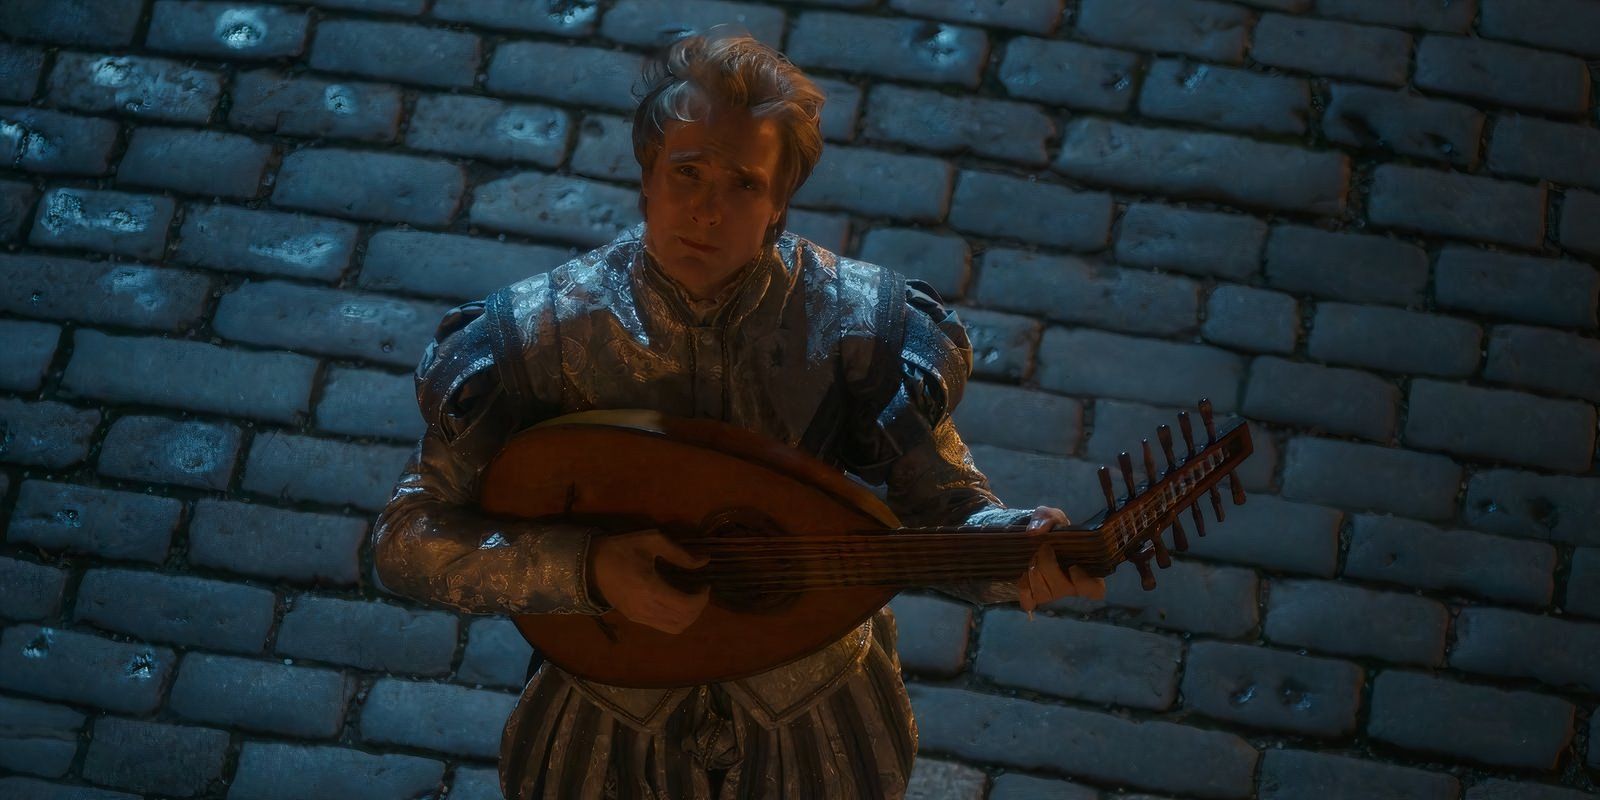 Stan Dudley holds a guitar in My Lady Jane